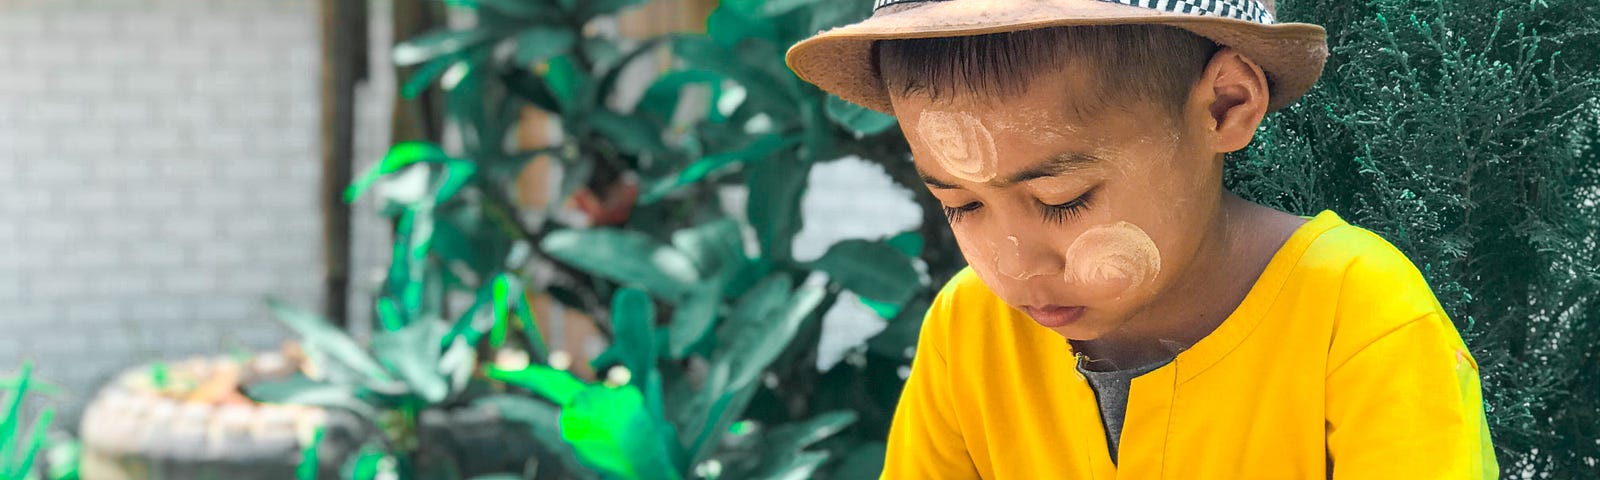 A little boy sits in the garden looking at a phone unsupervised. He wears a brown bowler hat, yellow t-shirt and shorts.